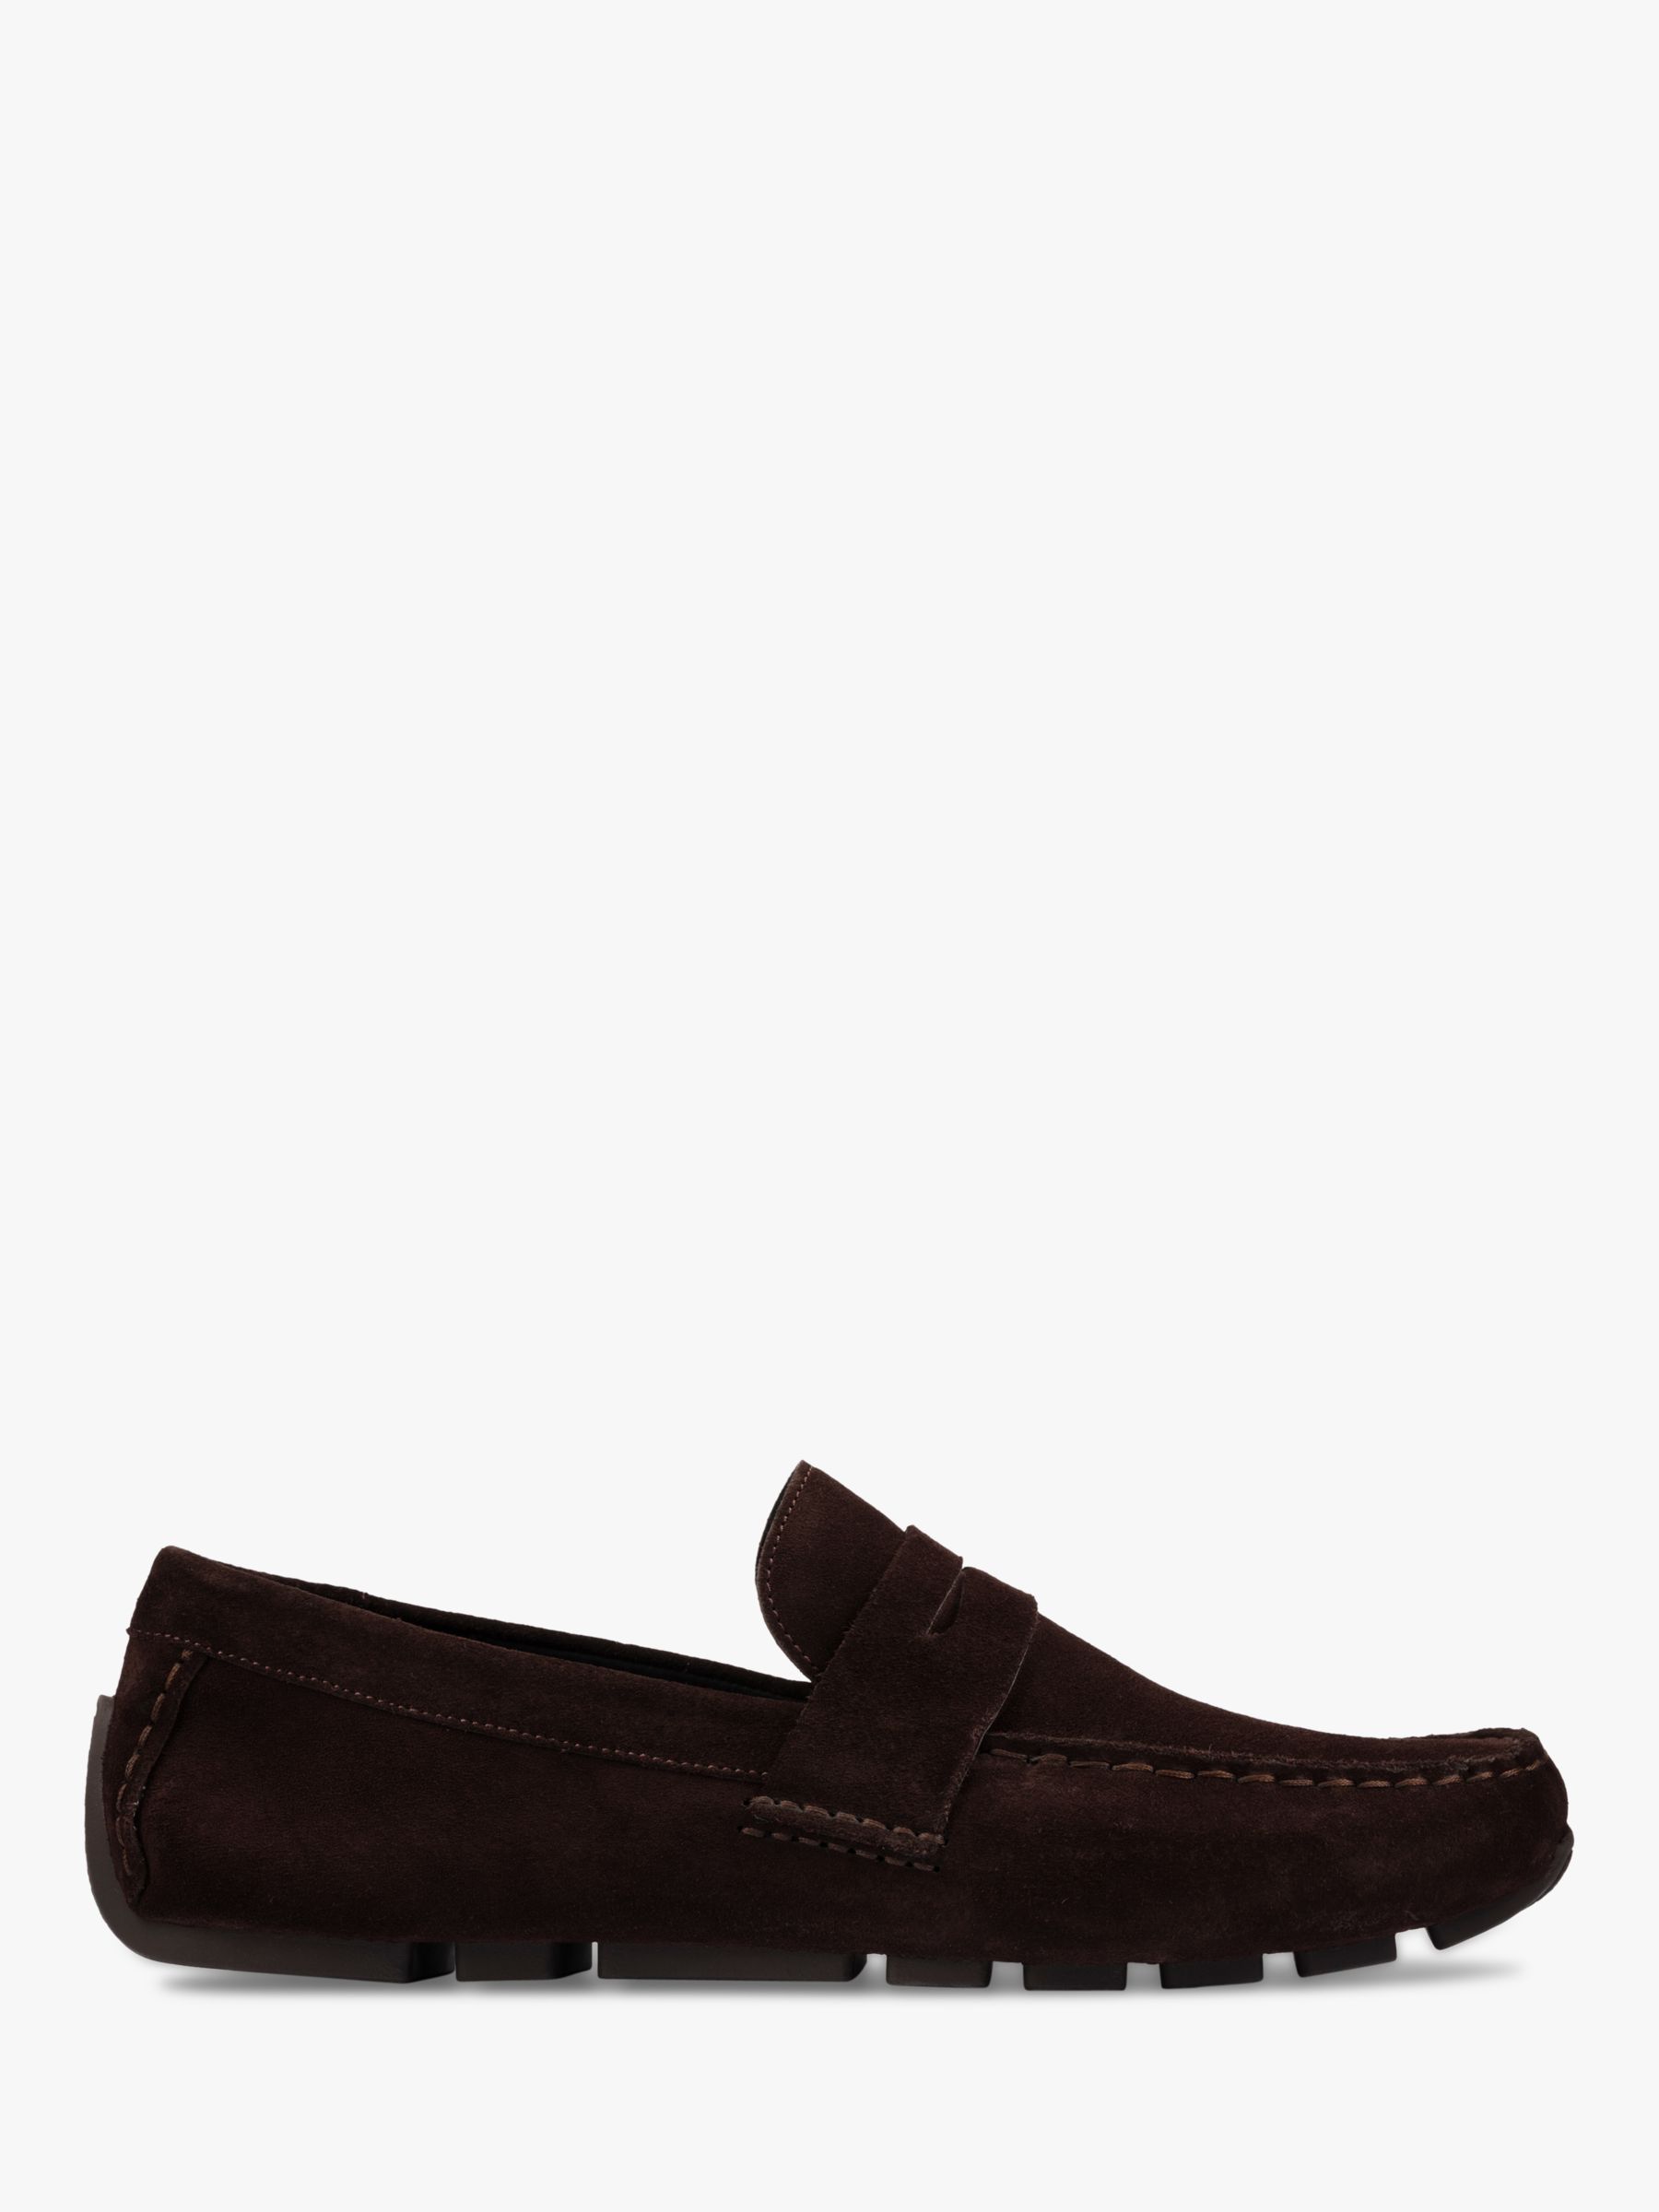 Clarks Oswick Suede Penny Loafers